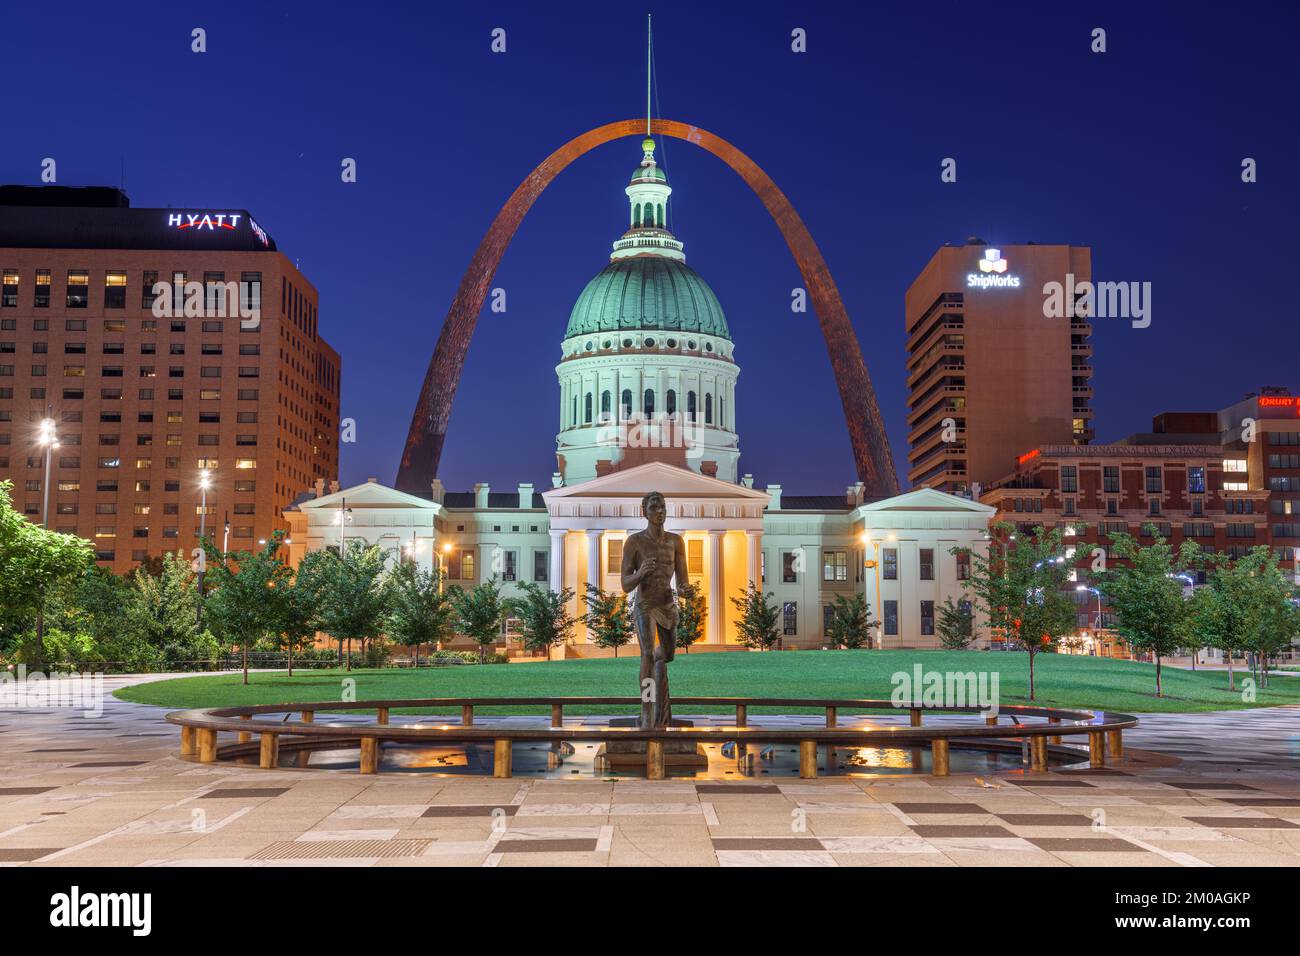 ST. LOUIS, MISSOURI, USA - August 23, 2018: View from Kiener Plaza Park with the The Olympic Runner Statue, Old Courthouse, and Gateway Arch at twilig Stock Photo